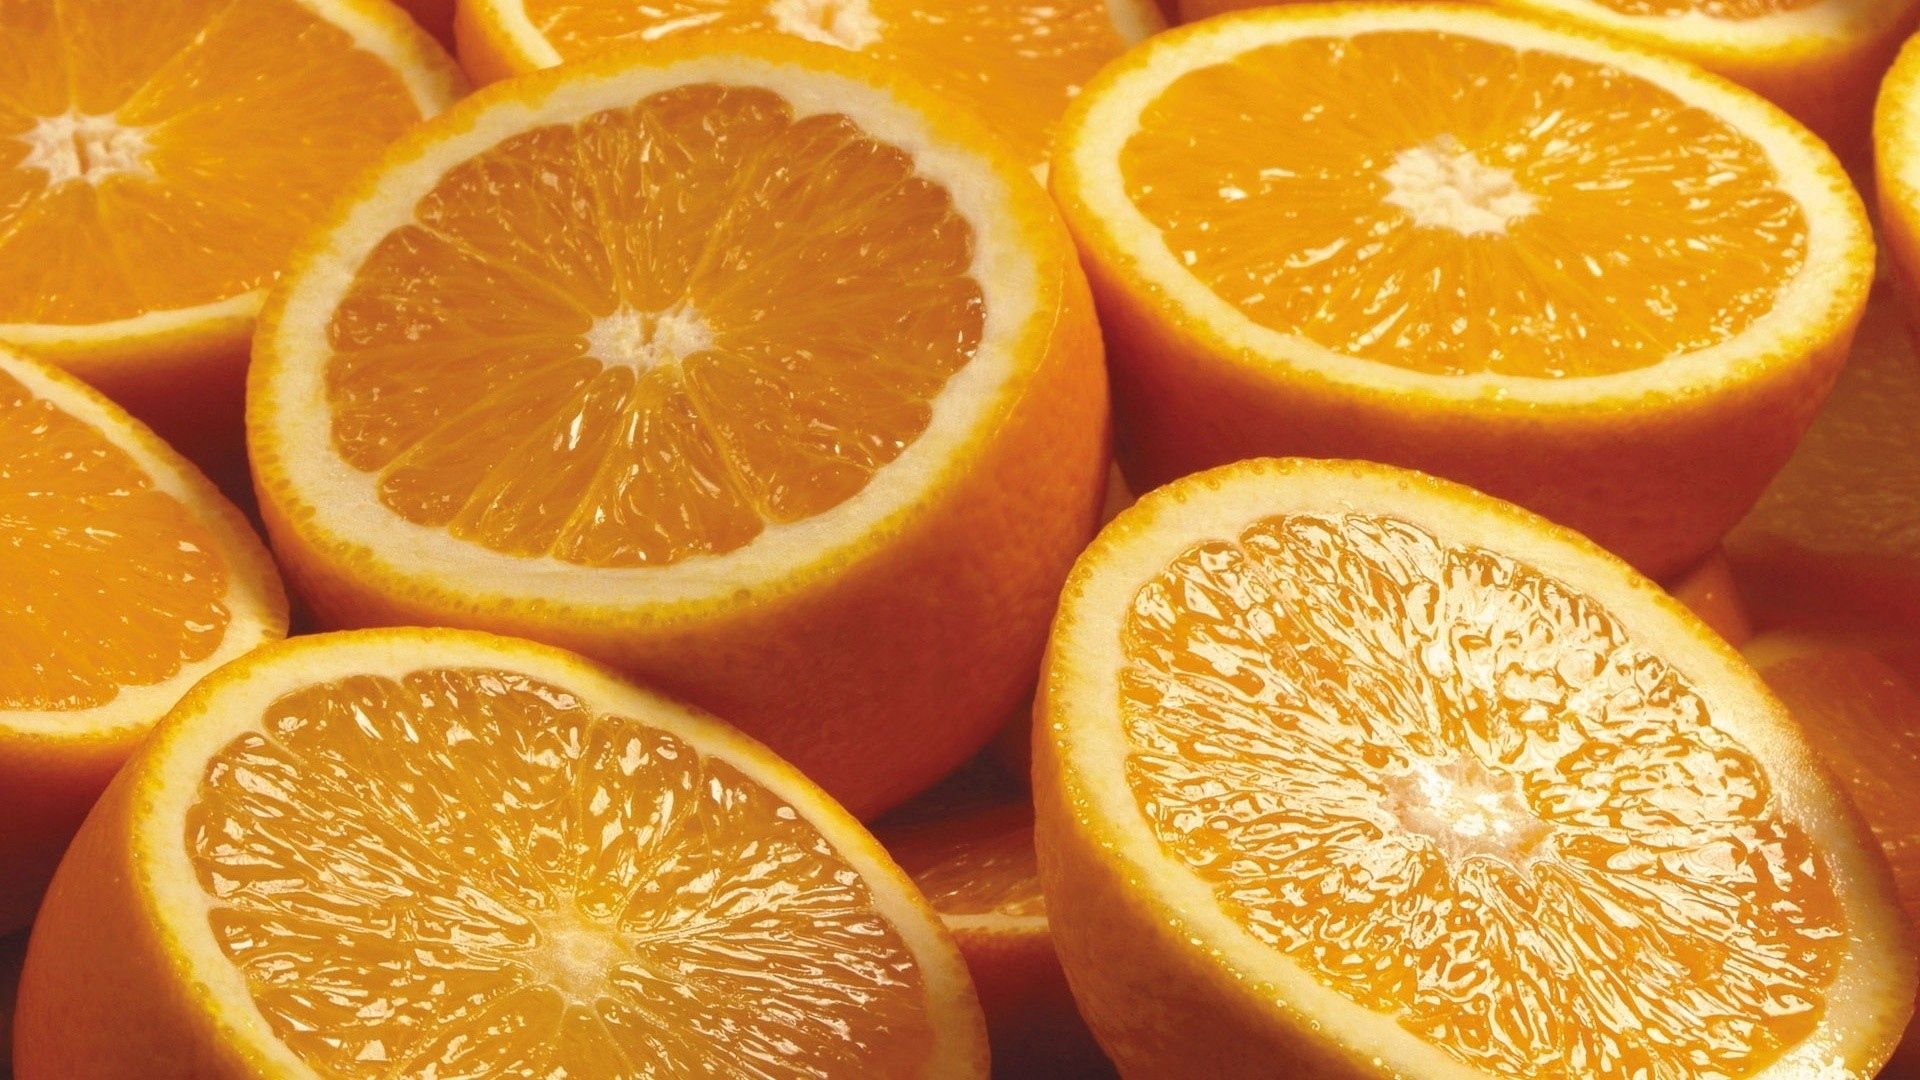 80328 download wallpaper food, oranges, sweet, citrus screensavers and pictures for free